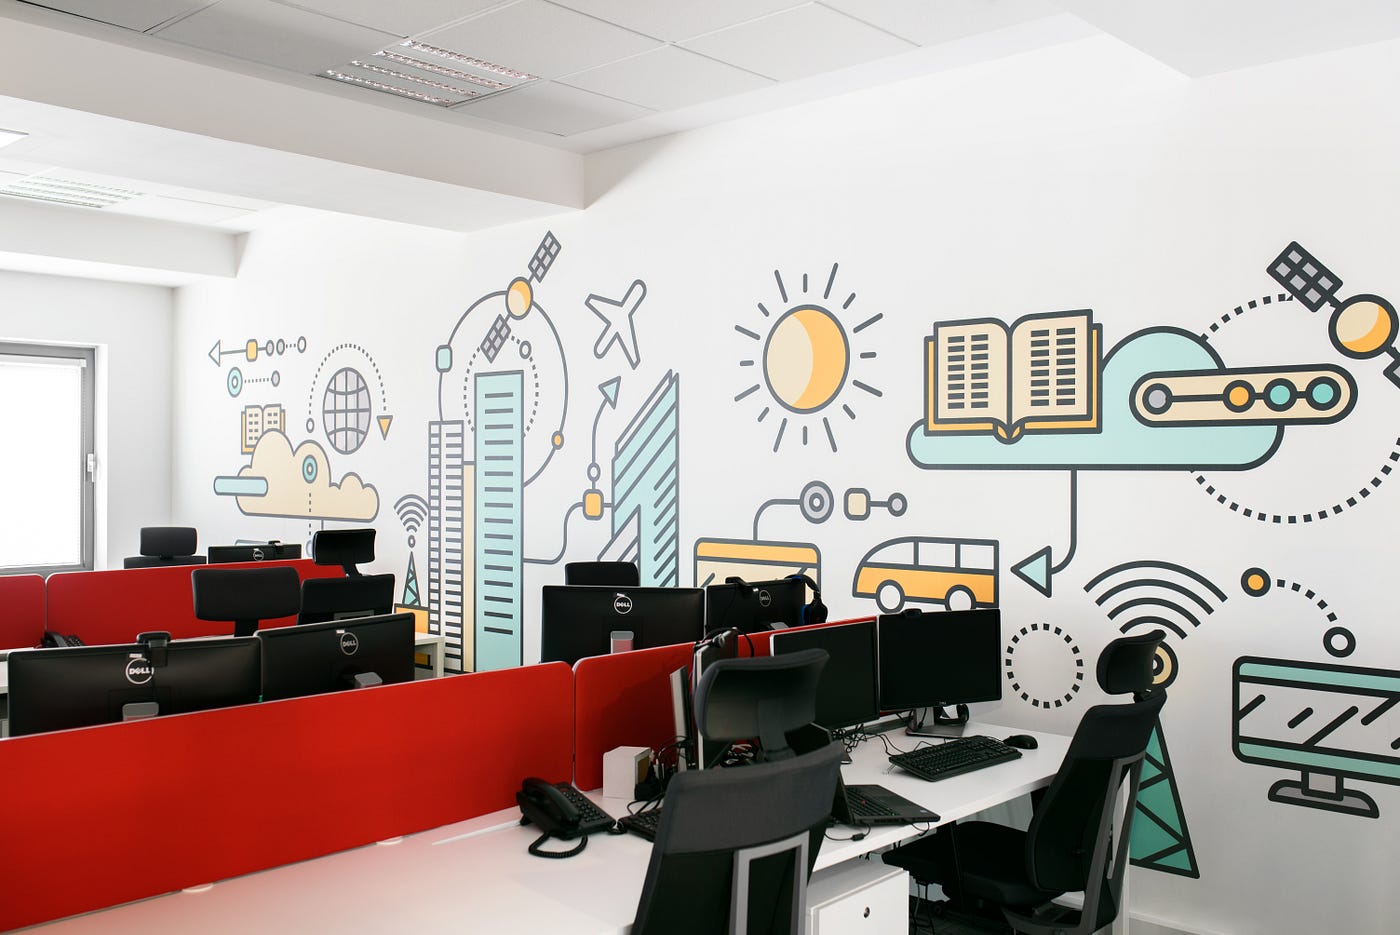 Inspiring space SoftServe office. By Ola Wronecka | by Pixers | Pixers ...